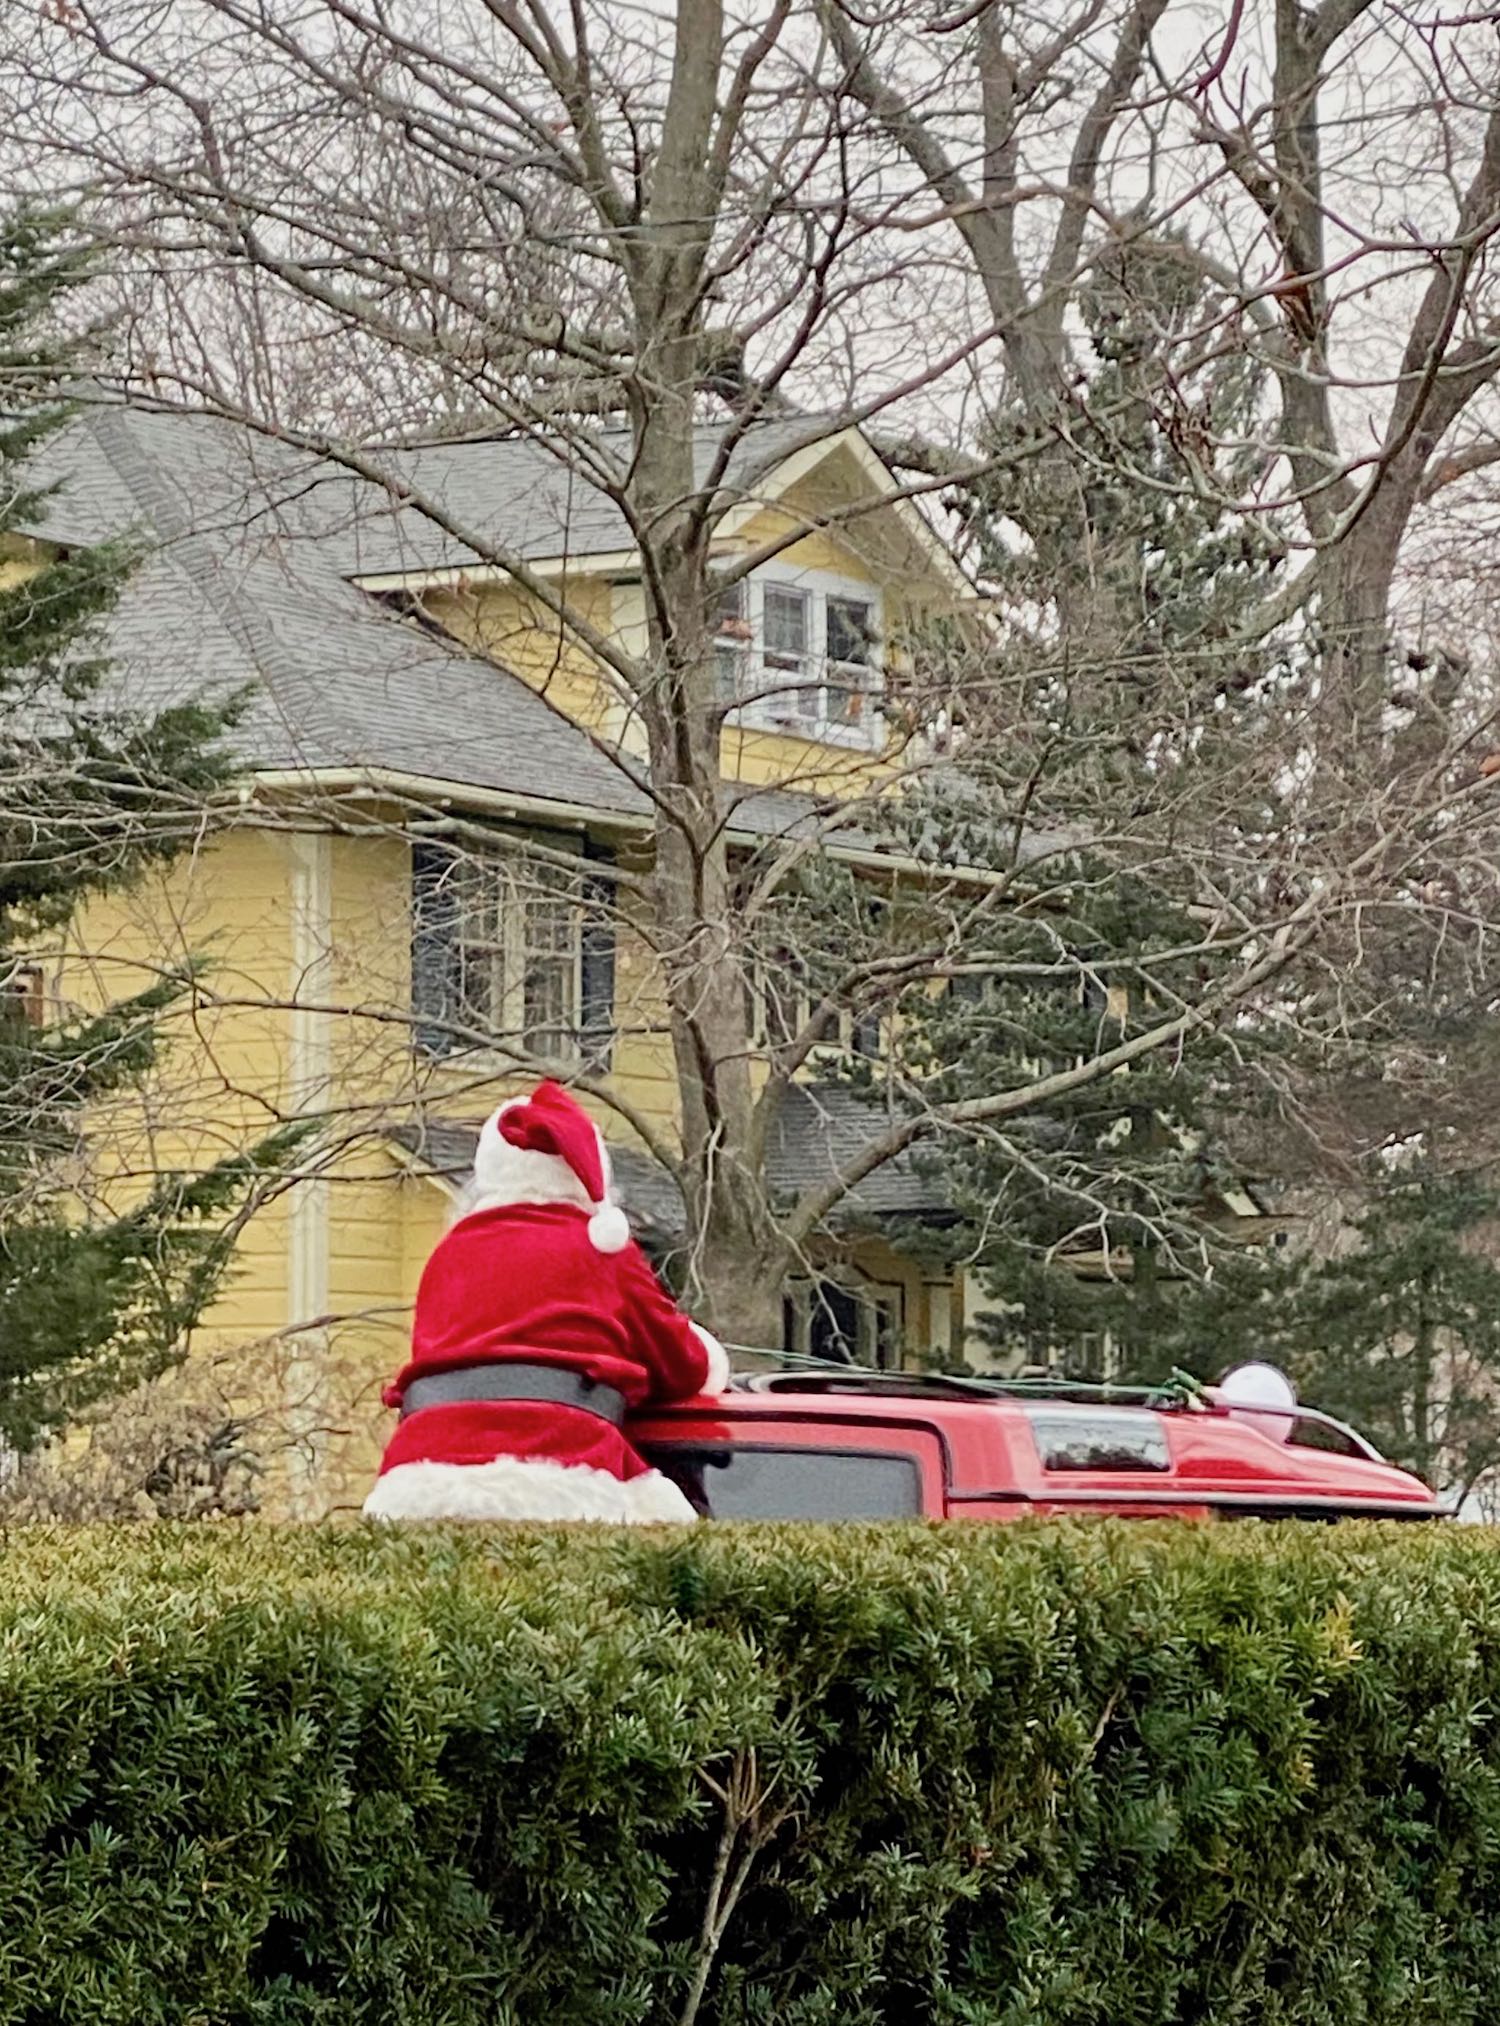 It's the weekend! Number 276, Santa Rides a Red SUV Through a Local Neighborhood